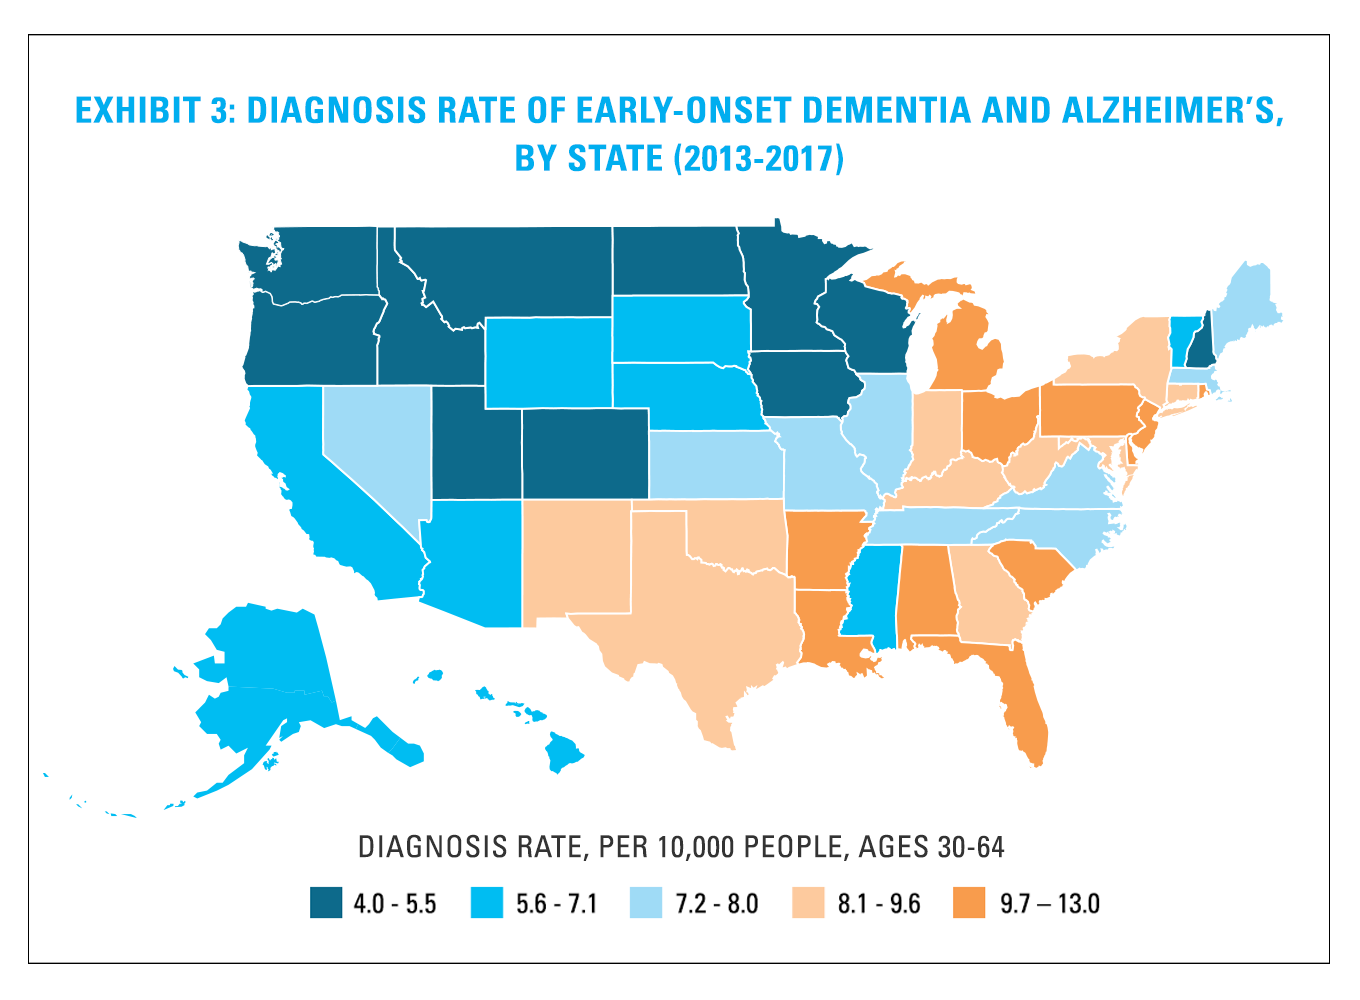 Exhibit 3: Diagnosis Rate of Early-Onset Dementia and Alzheimer’s, by State (2013-2017)